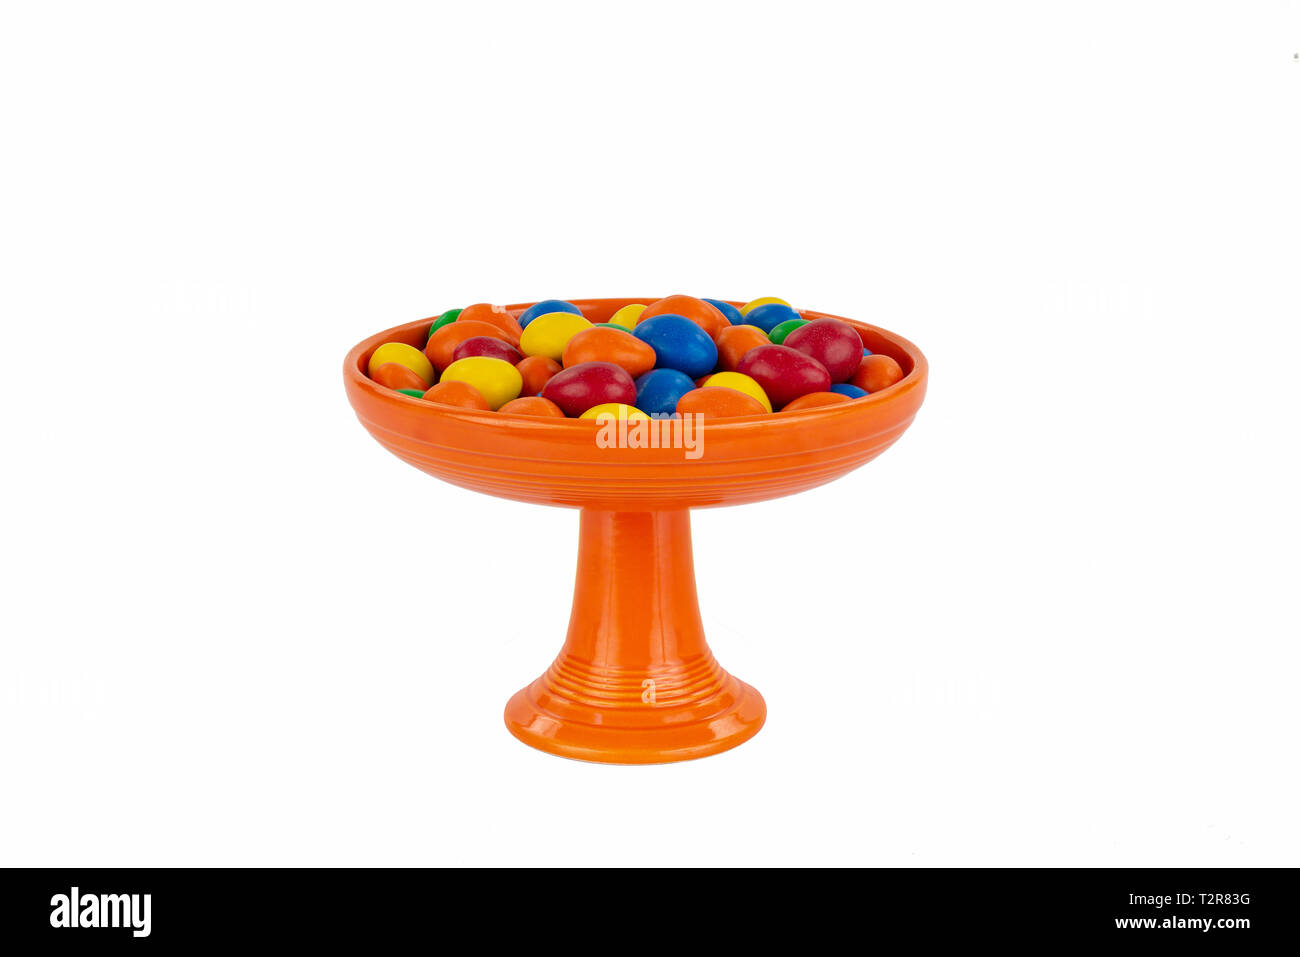 Bright Orange Vintage Fiesta Ware Pedestal Candy Serving Dish with an Assortment of Colorful Candy. Sophisticated and Isolated on White. Stock Photo